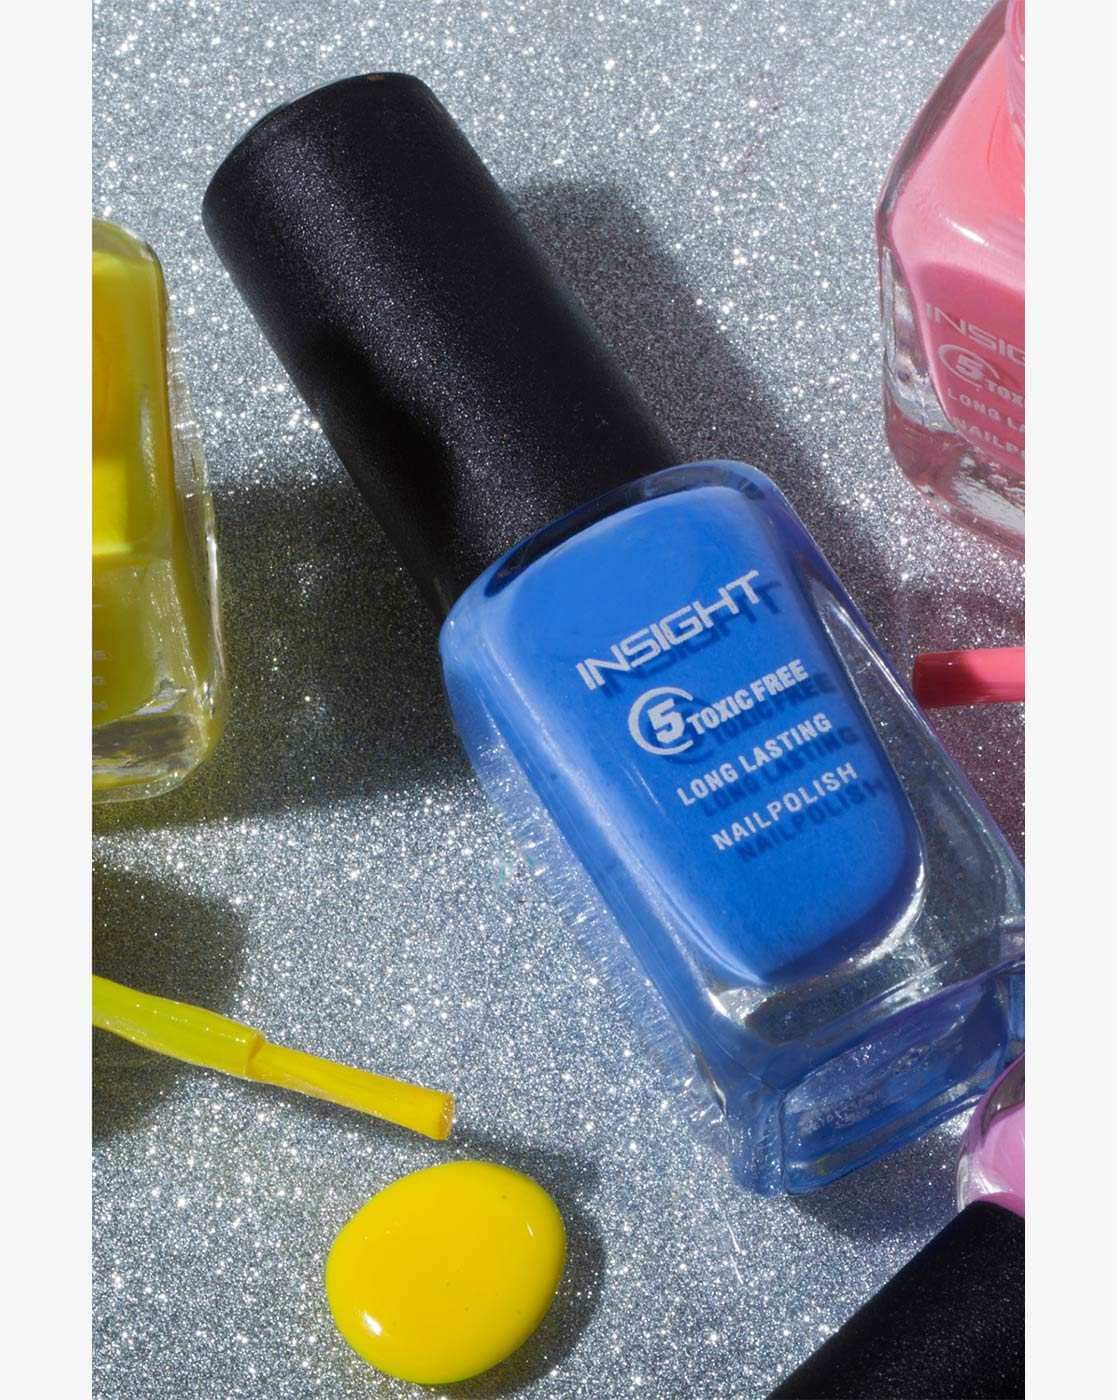 Buy Insight Nail Polish 15 ml Online at Low Prices in India - Amazon.in